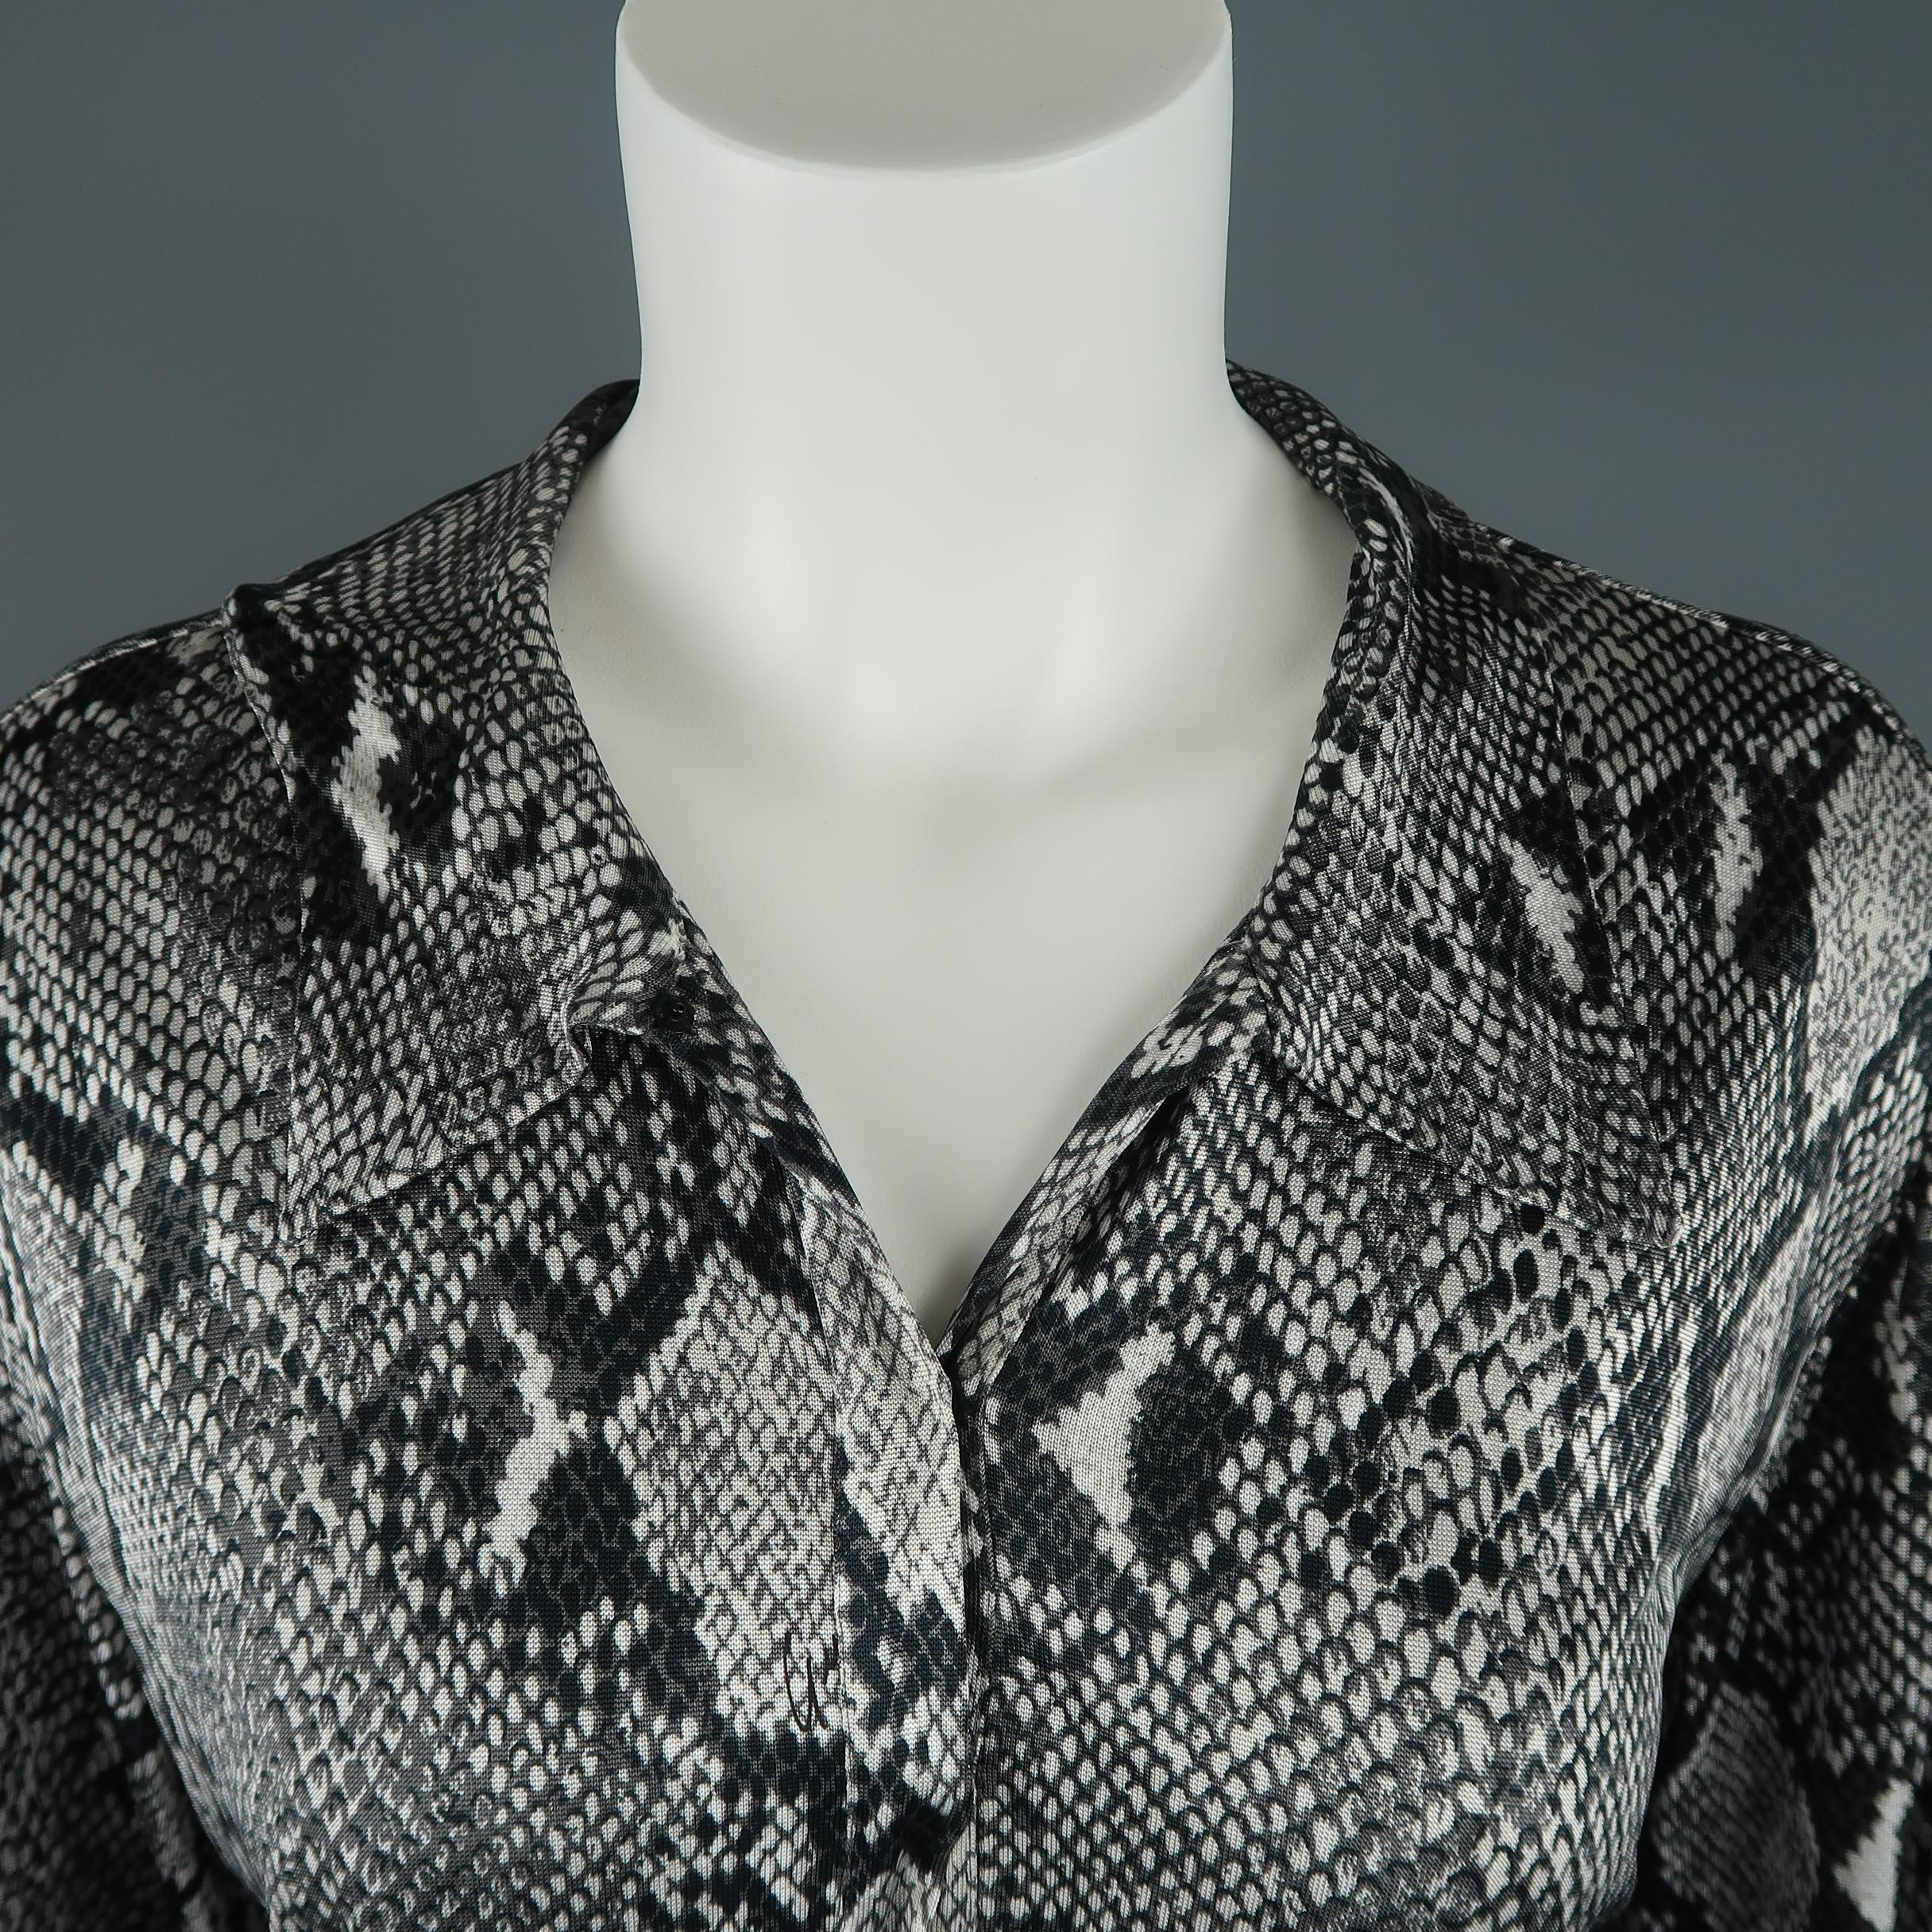 Rare GUCCI Spring 2000 Collection by TOM FORD blouse comes in gray python snake print rayon with an asymmetrical pointed collar, hidden snap half closure, slit cuff sleeves, and elastic waistband. Matching Pants available separately. Made in Italy.
